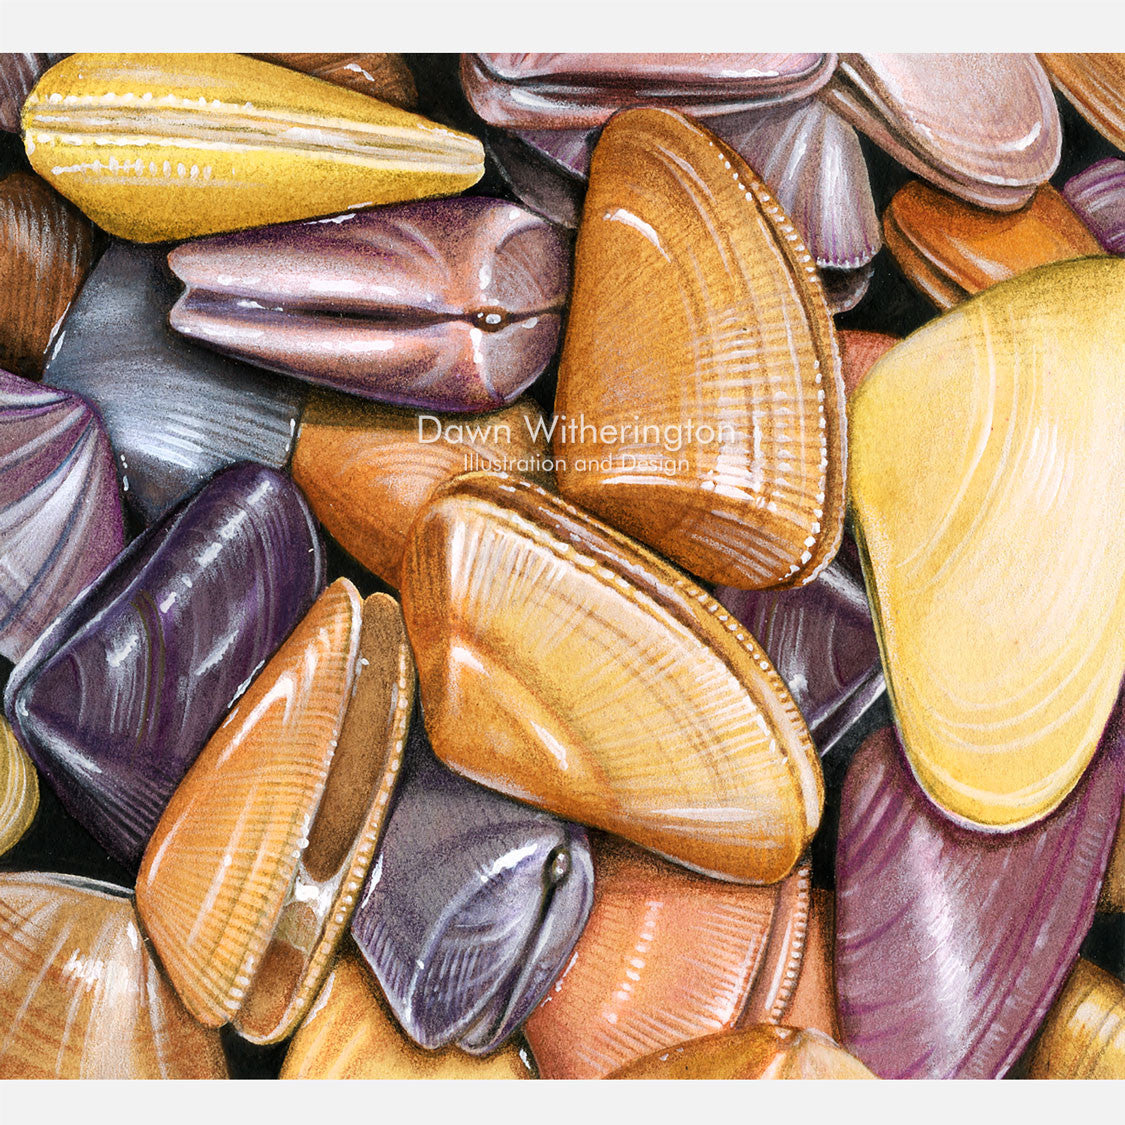 This beautiful illustration of a pile of living coquina clams, Donax variabilis, is accurate in detail.